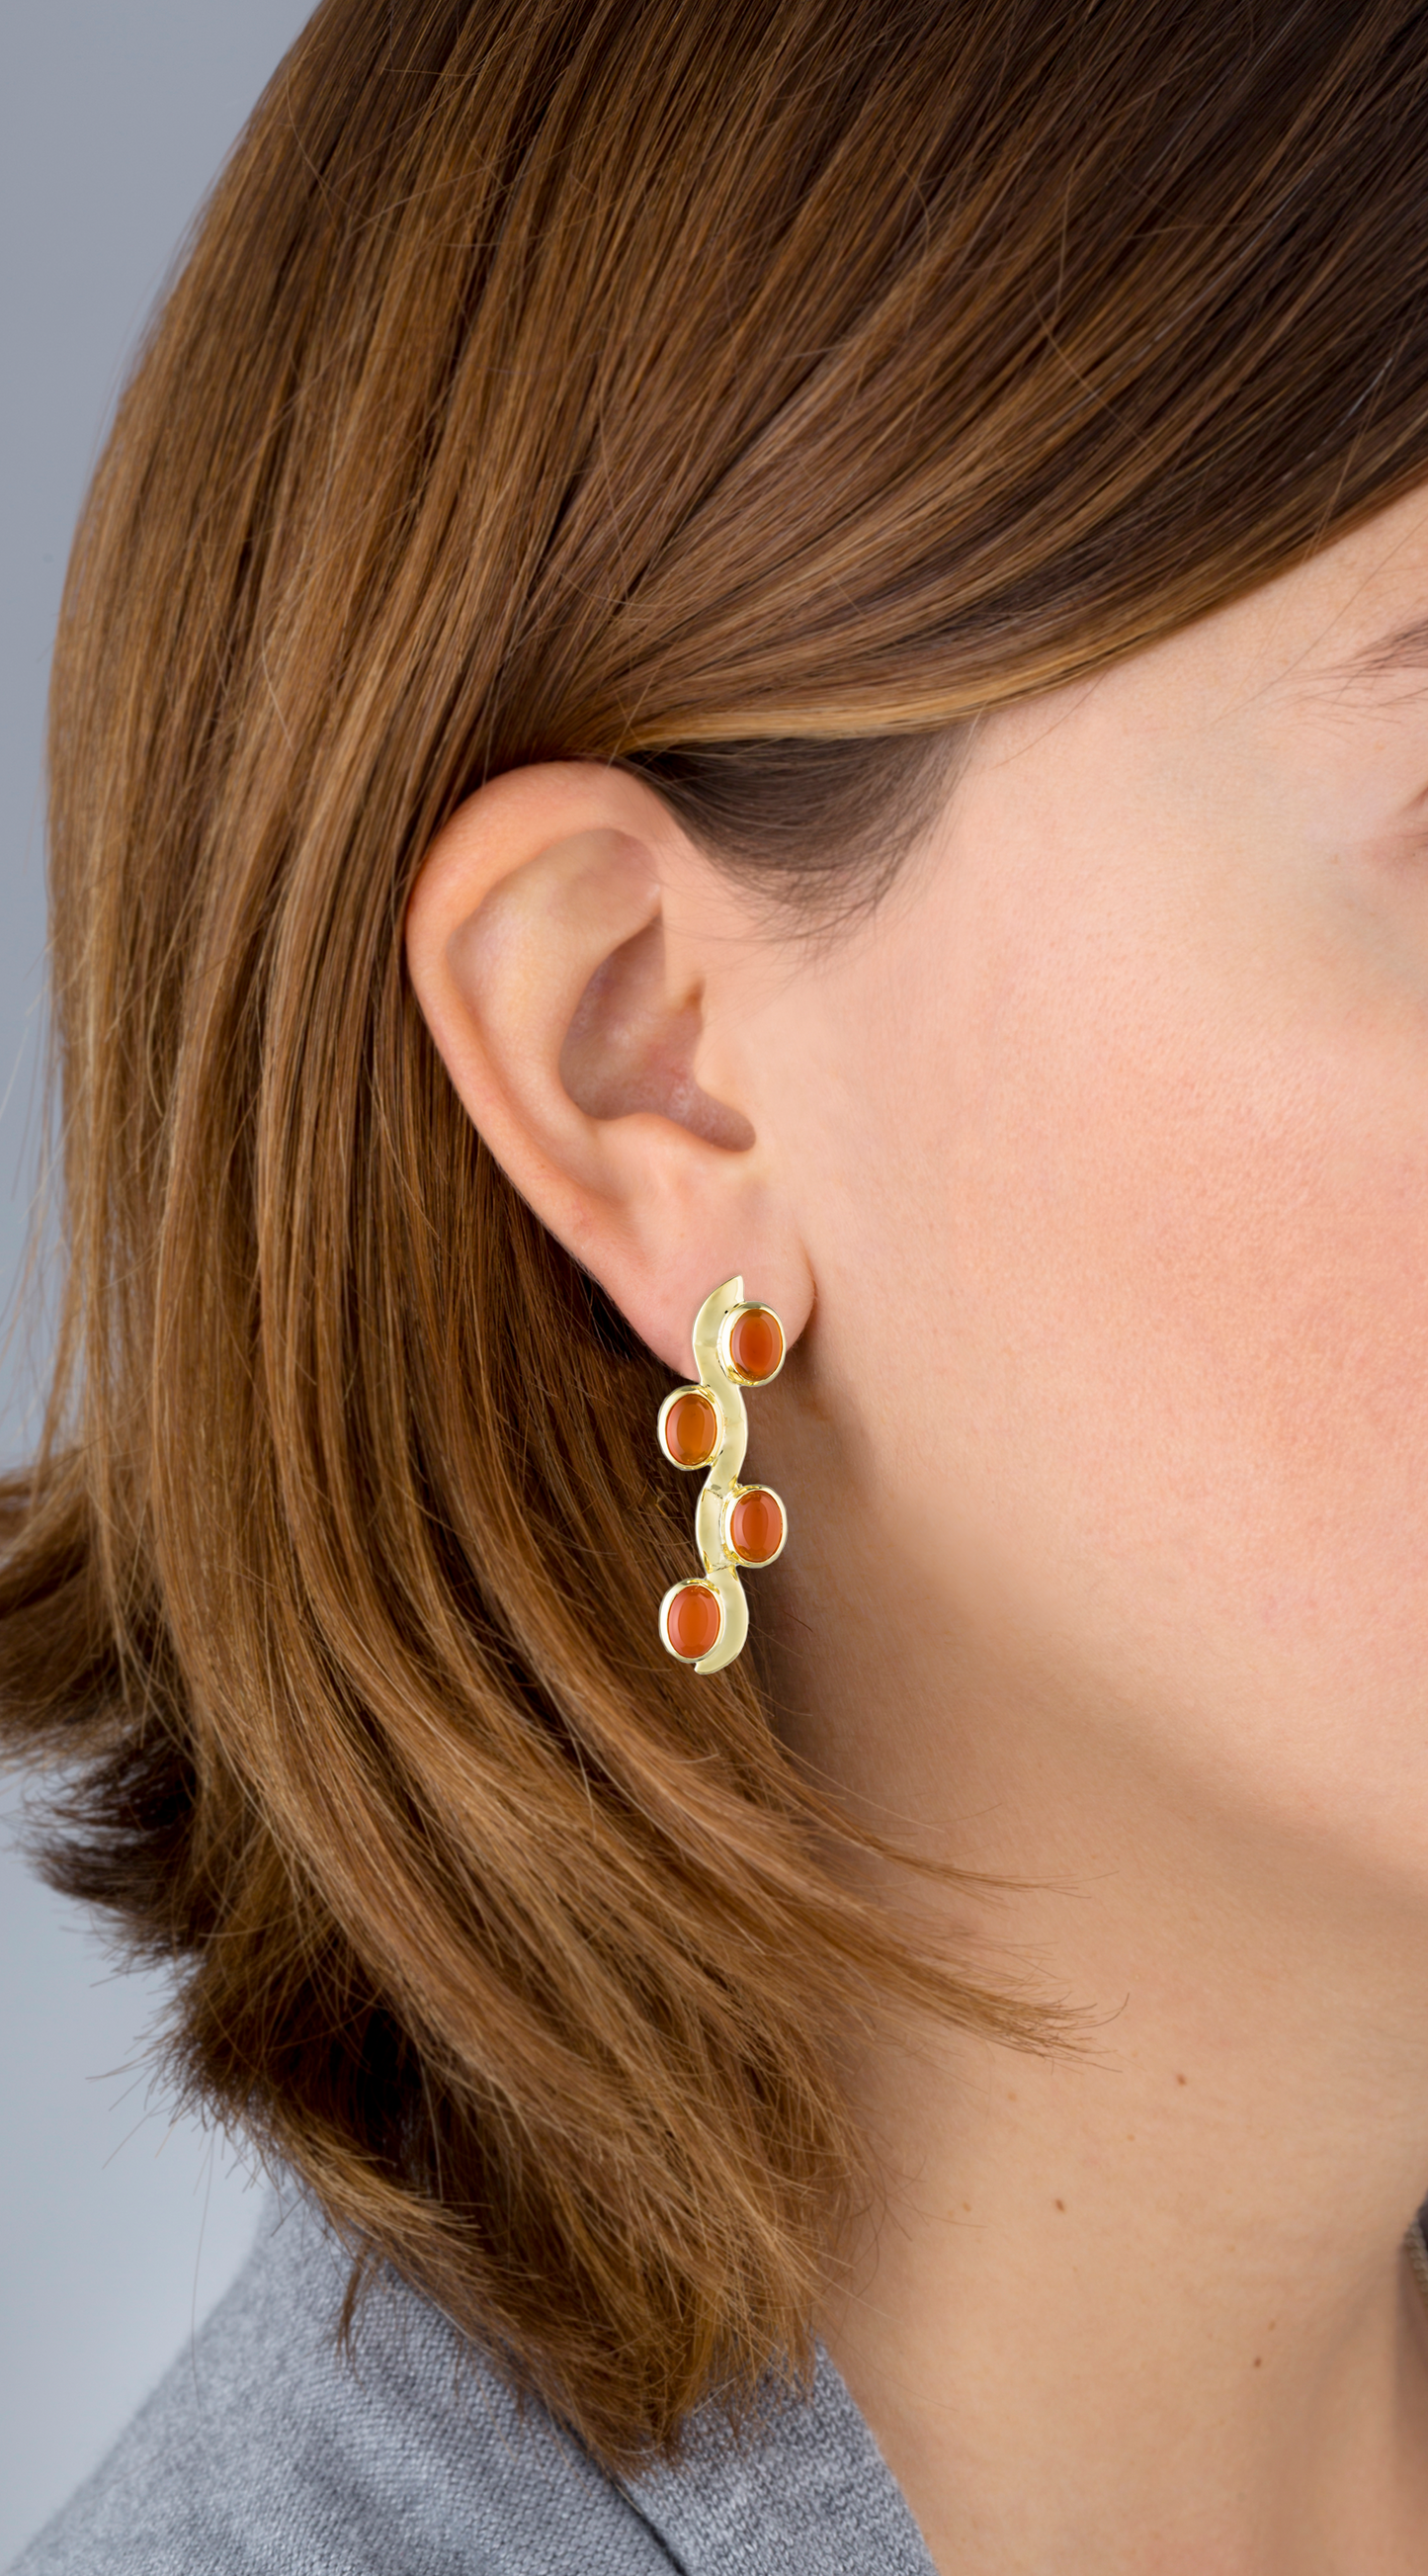 925 Silver Earrings plated in 18k Yellow Gold with Carnelian